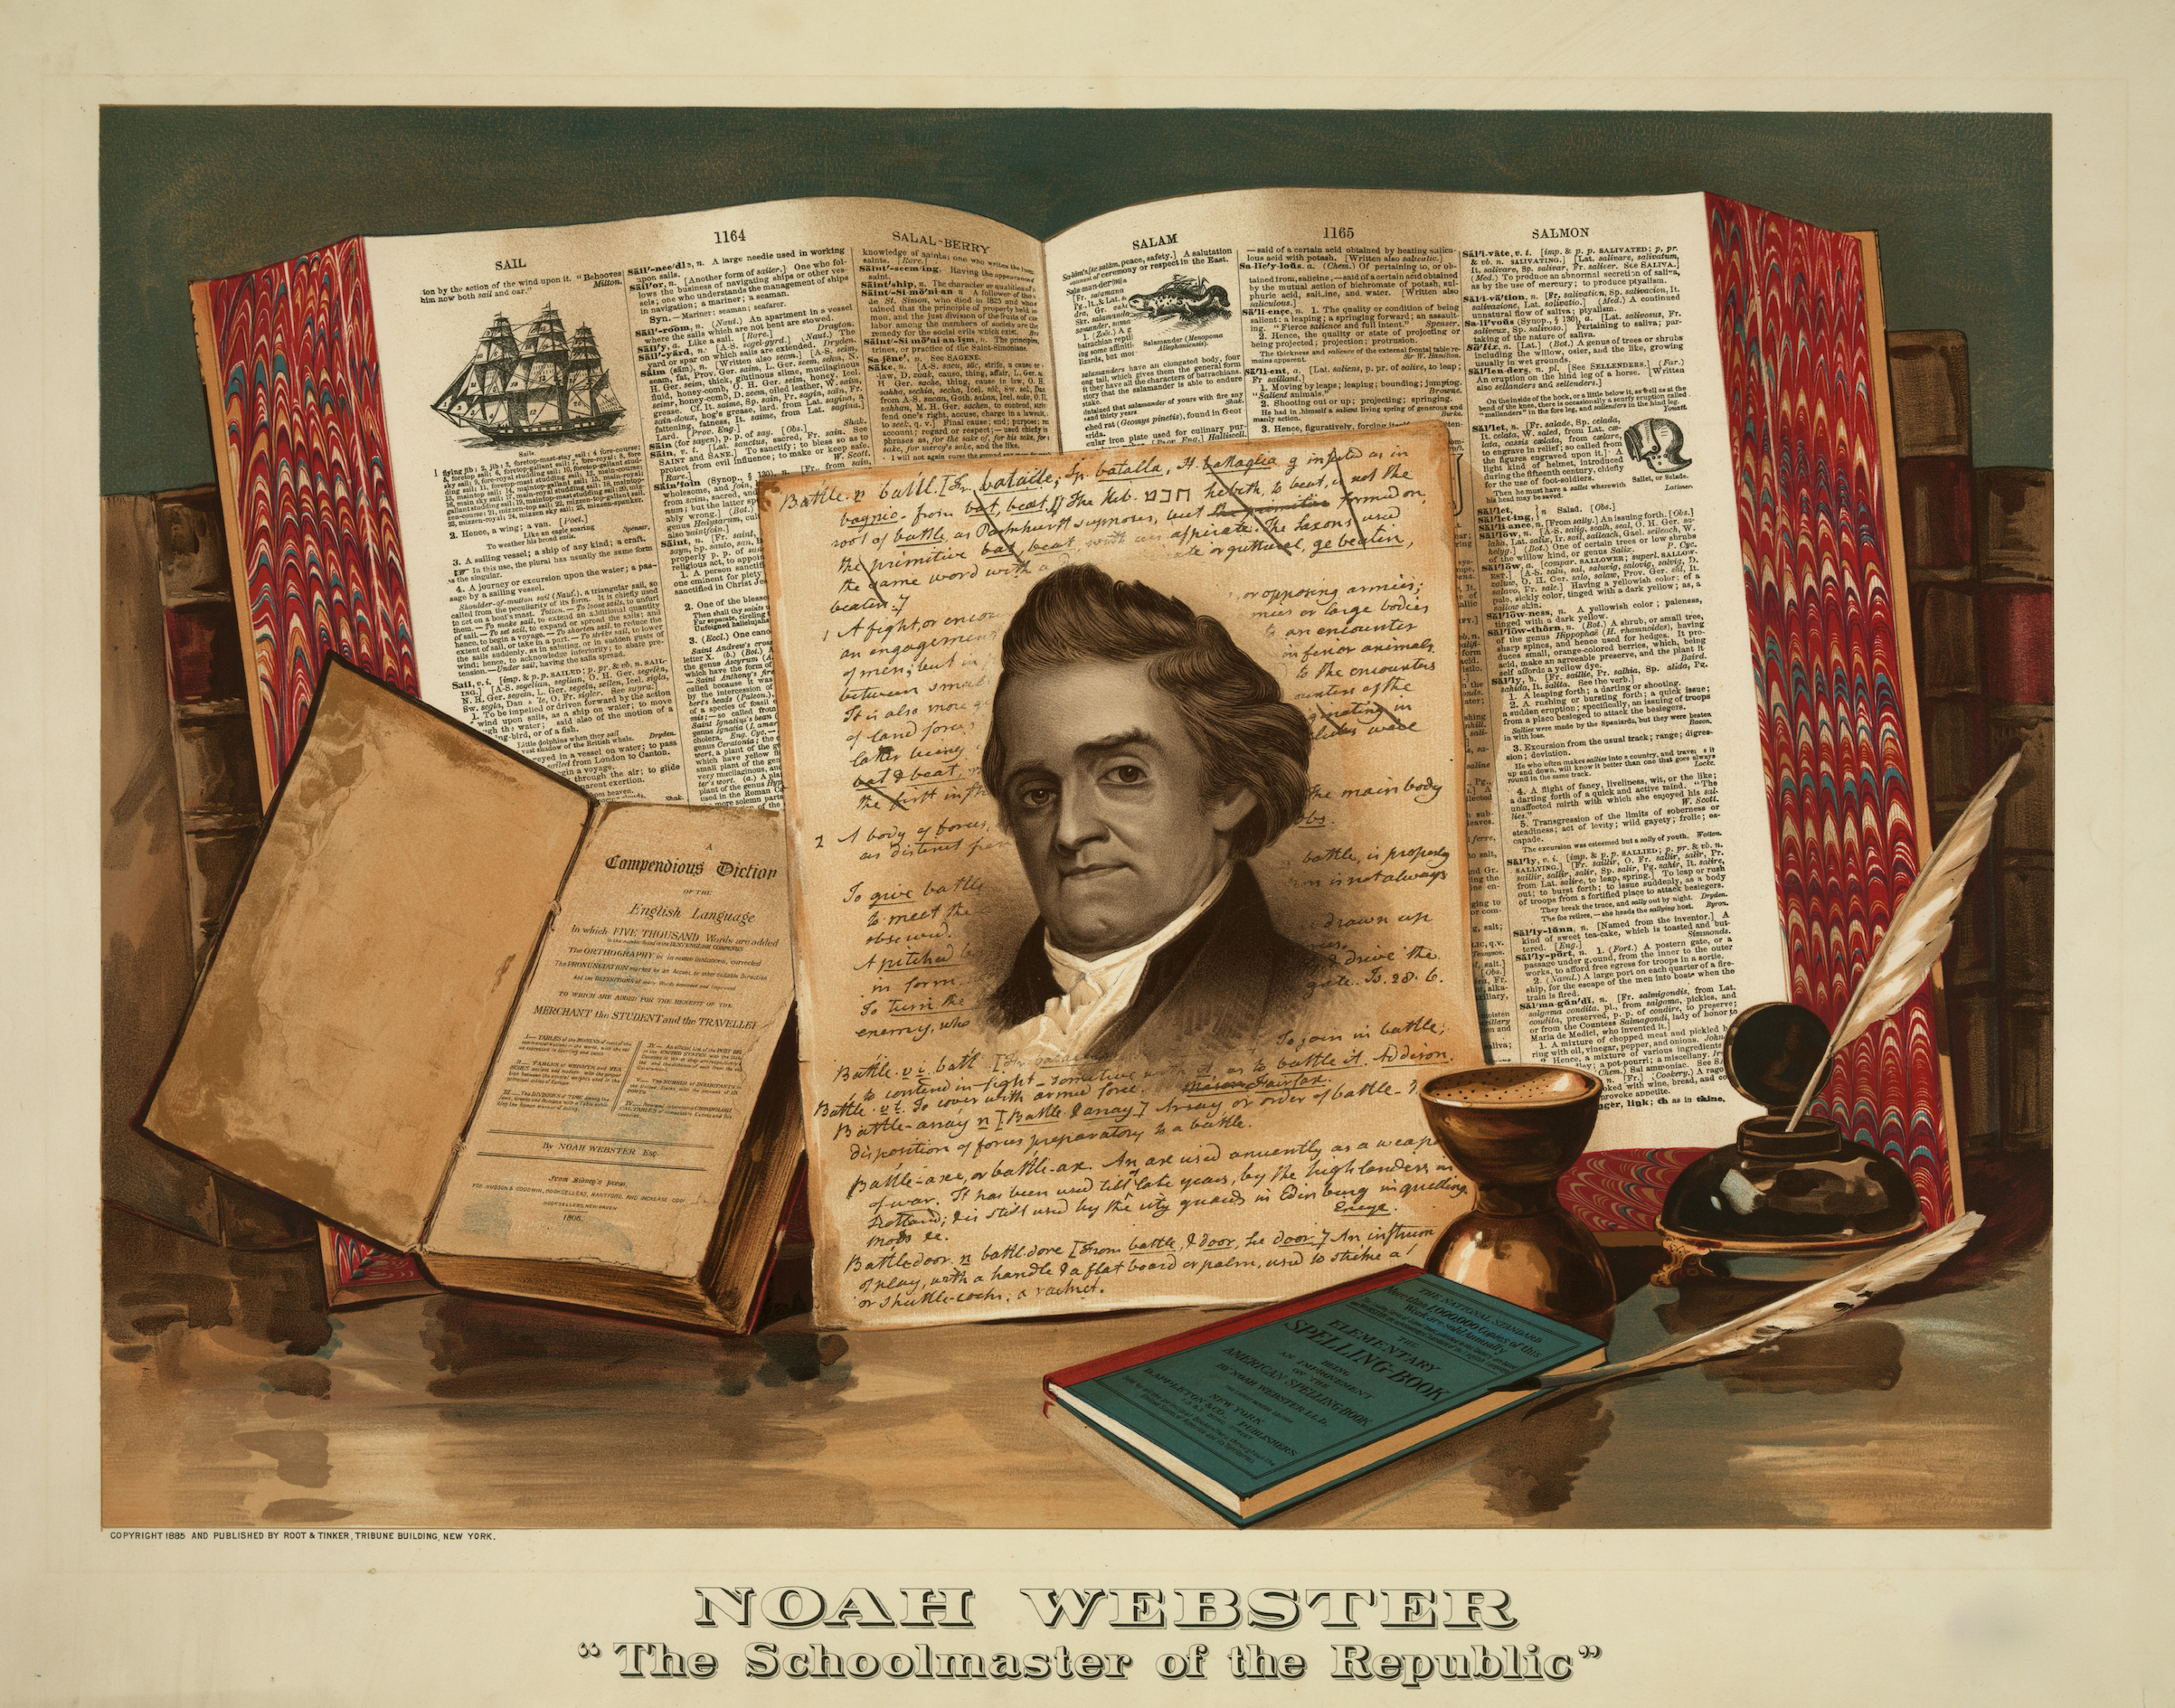 Noah Webster. Born 1758-died 1843. The schoolmaster of the republic; portrait shown in front of dictionary, books, inkwell &amp; desk, 19th century. (Buyenlarge/Getty Images)